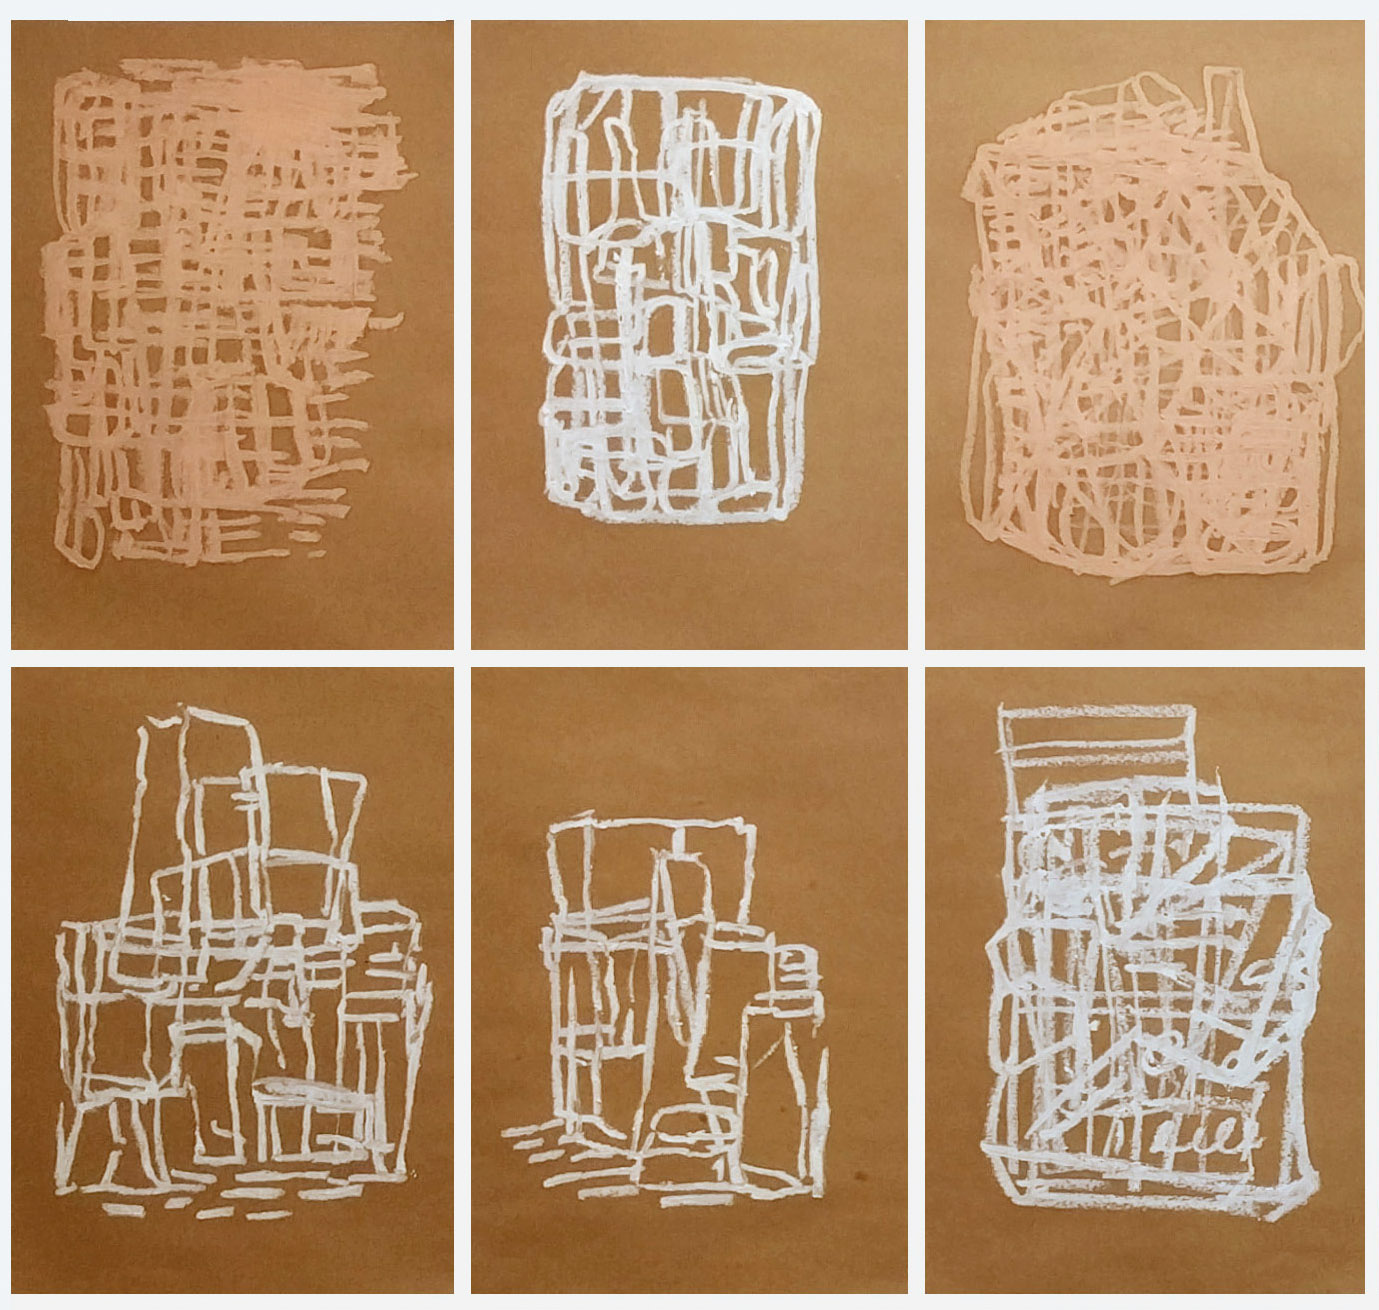 6 oil stick drawings in a 3 x 2 grid